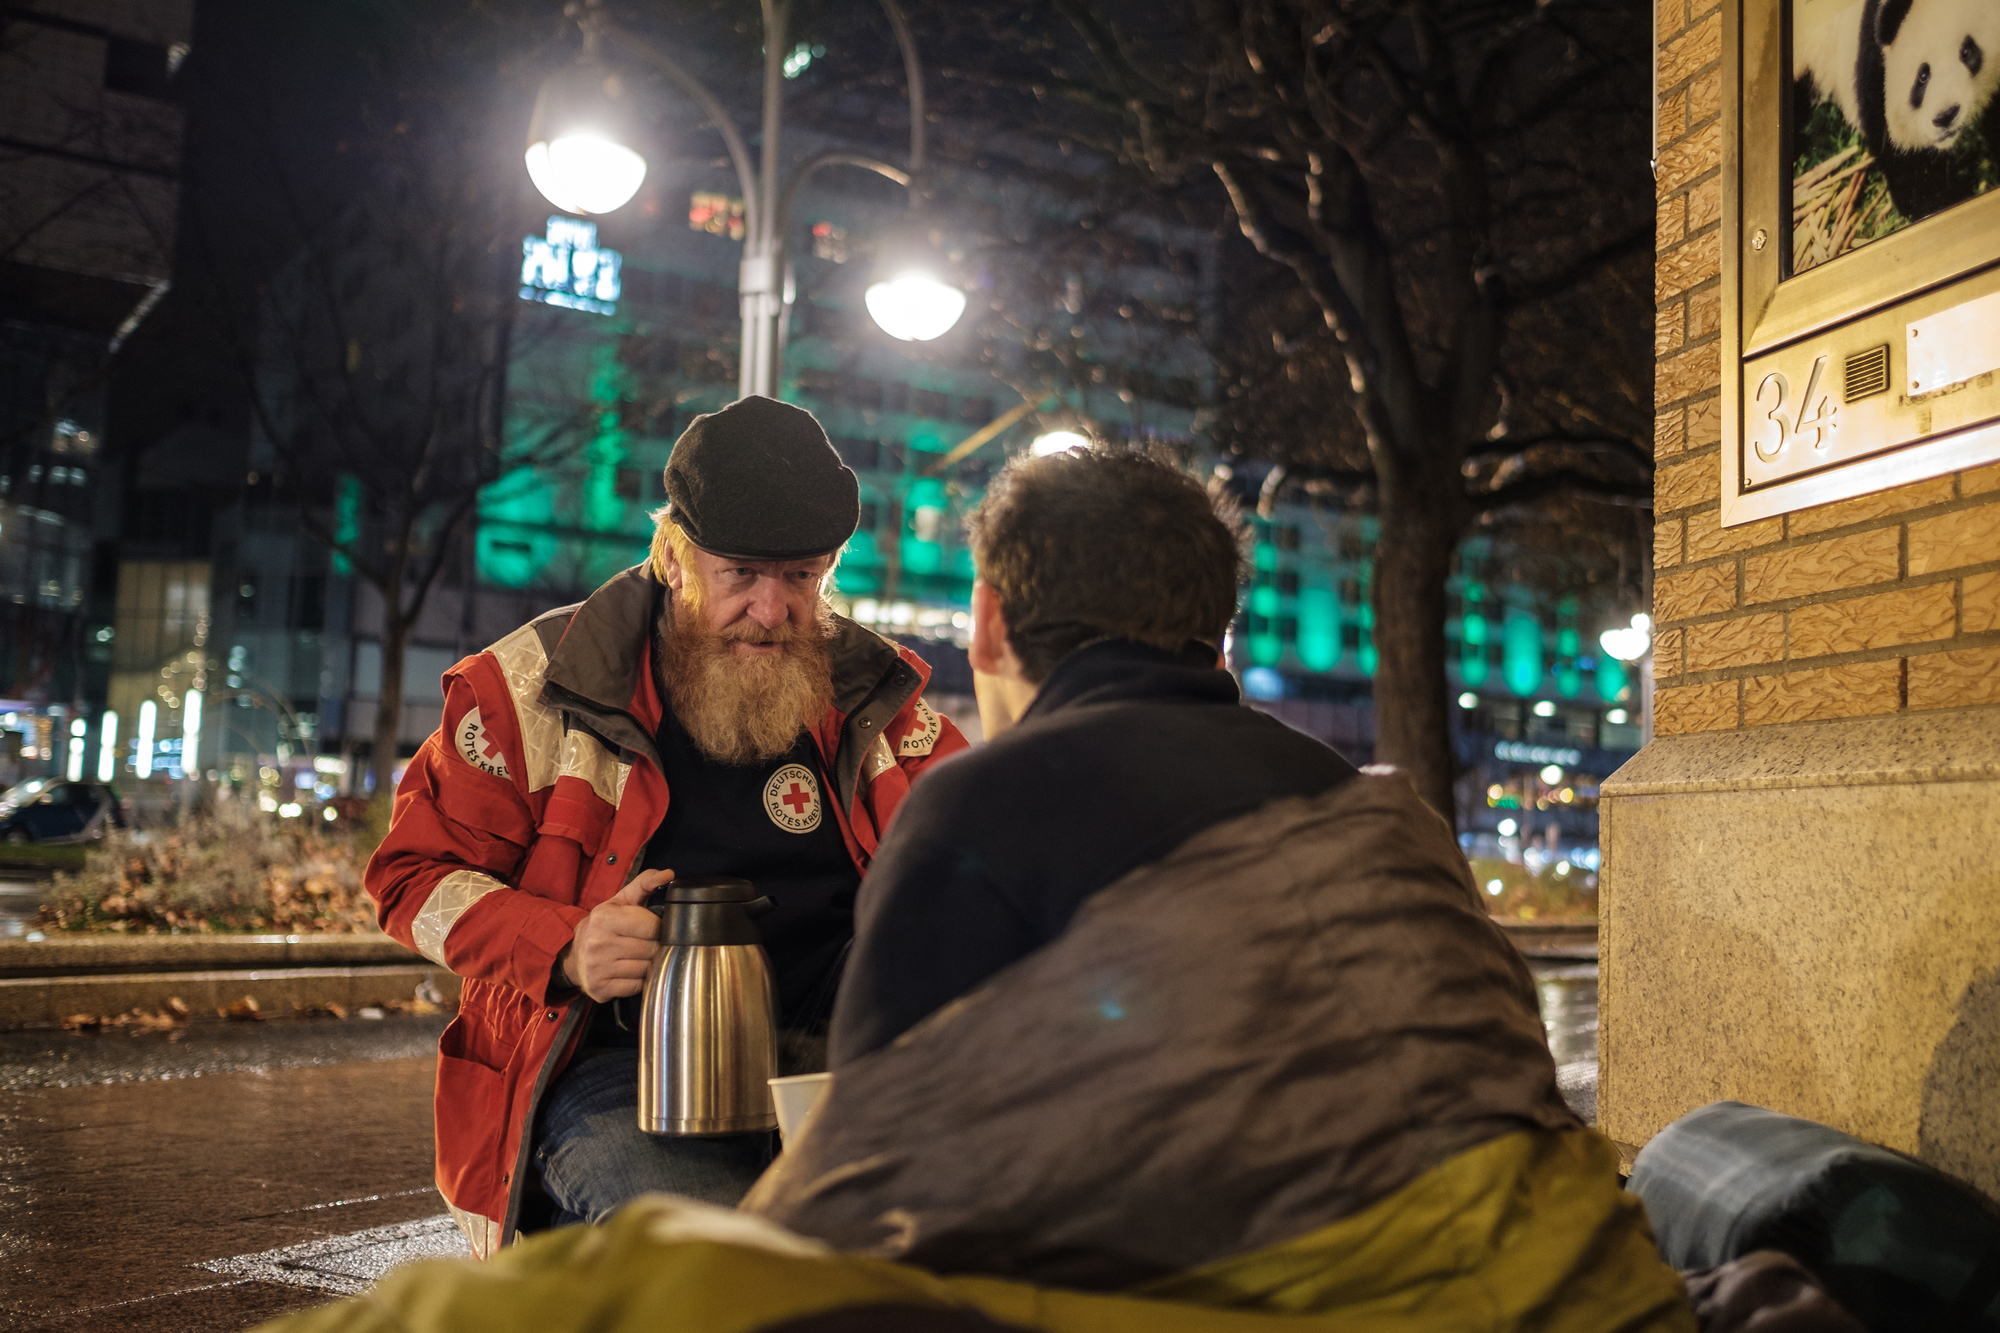 Red Cross Approach: Combatting Homelessness in Europe